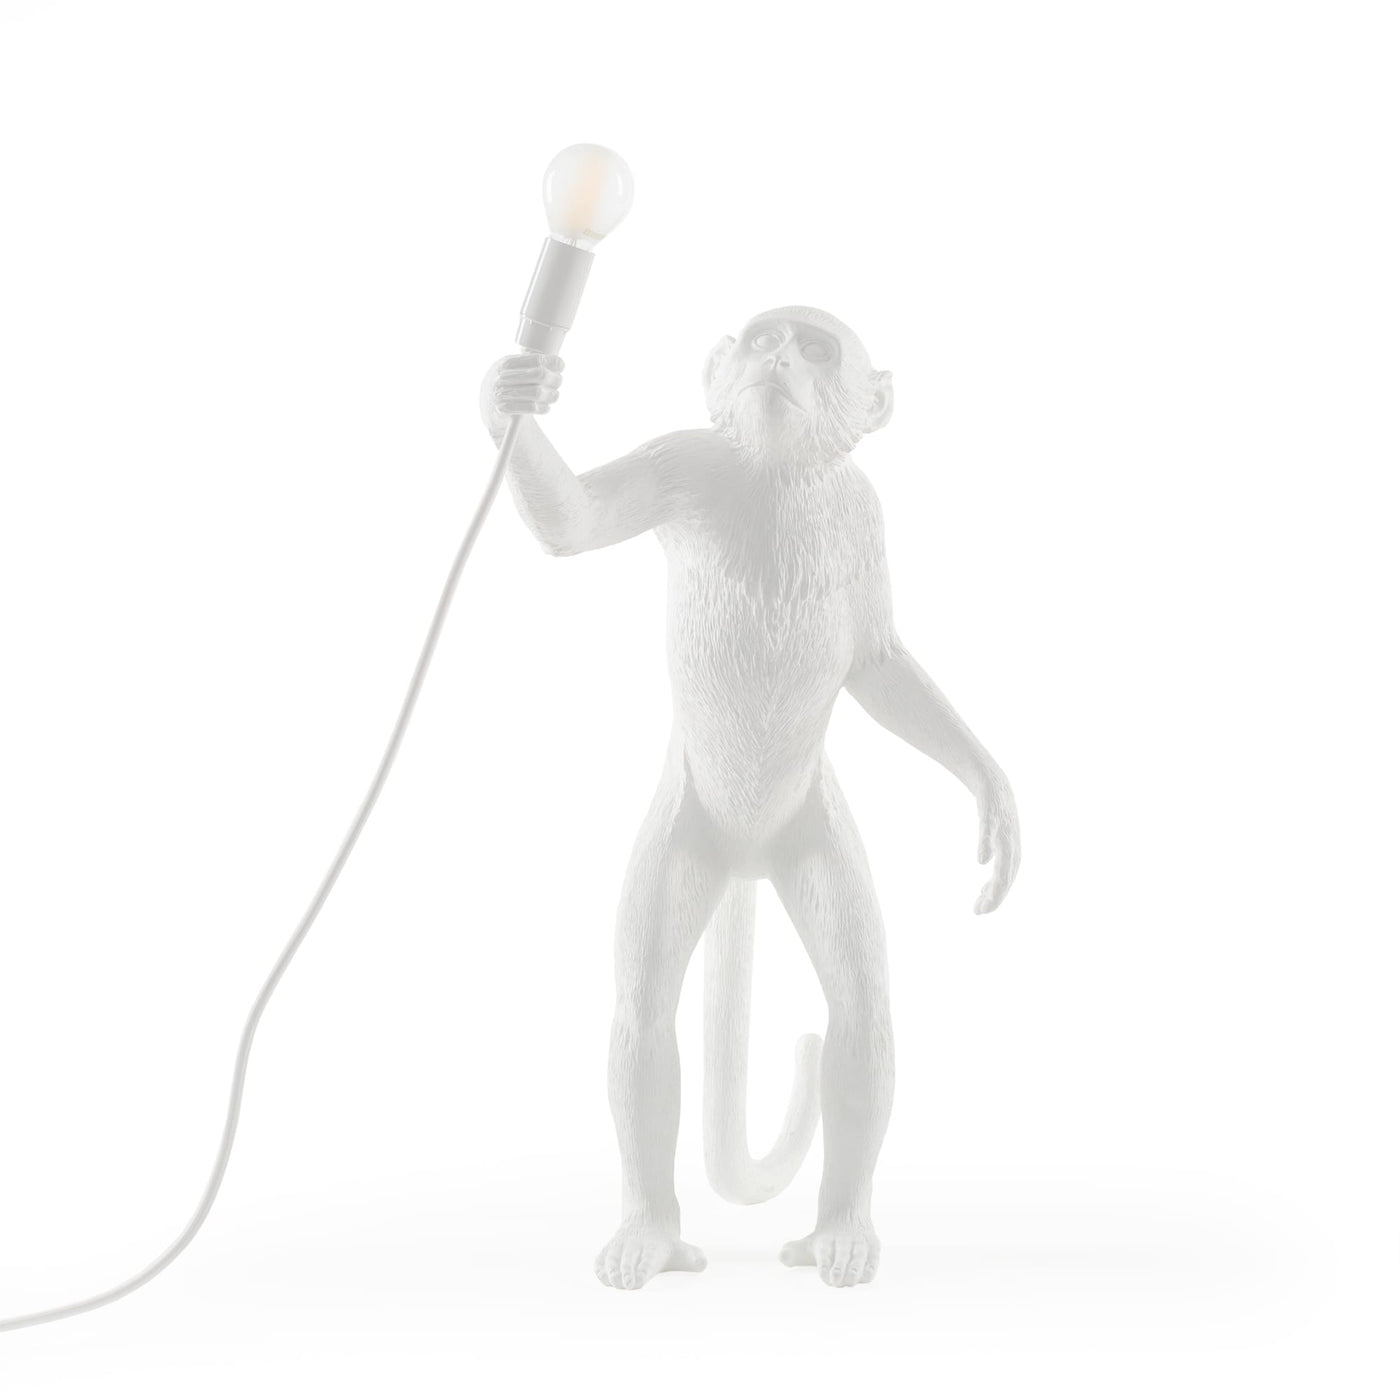 The Monkey Lamp - Standing Version